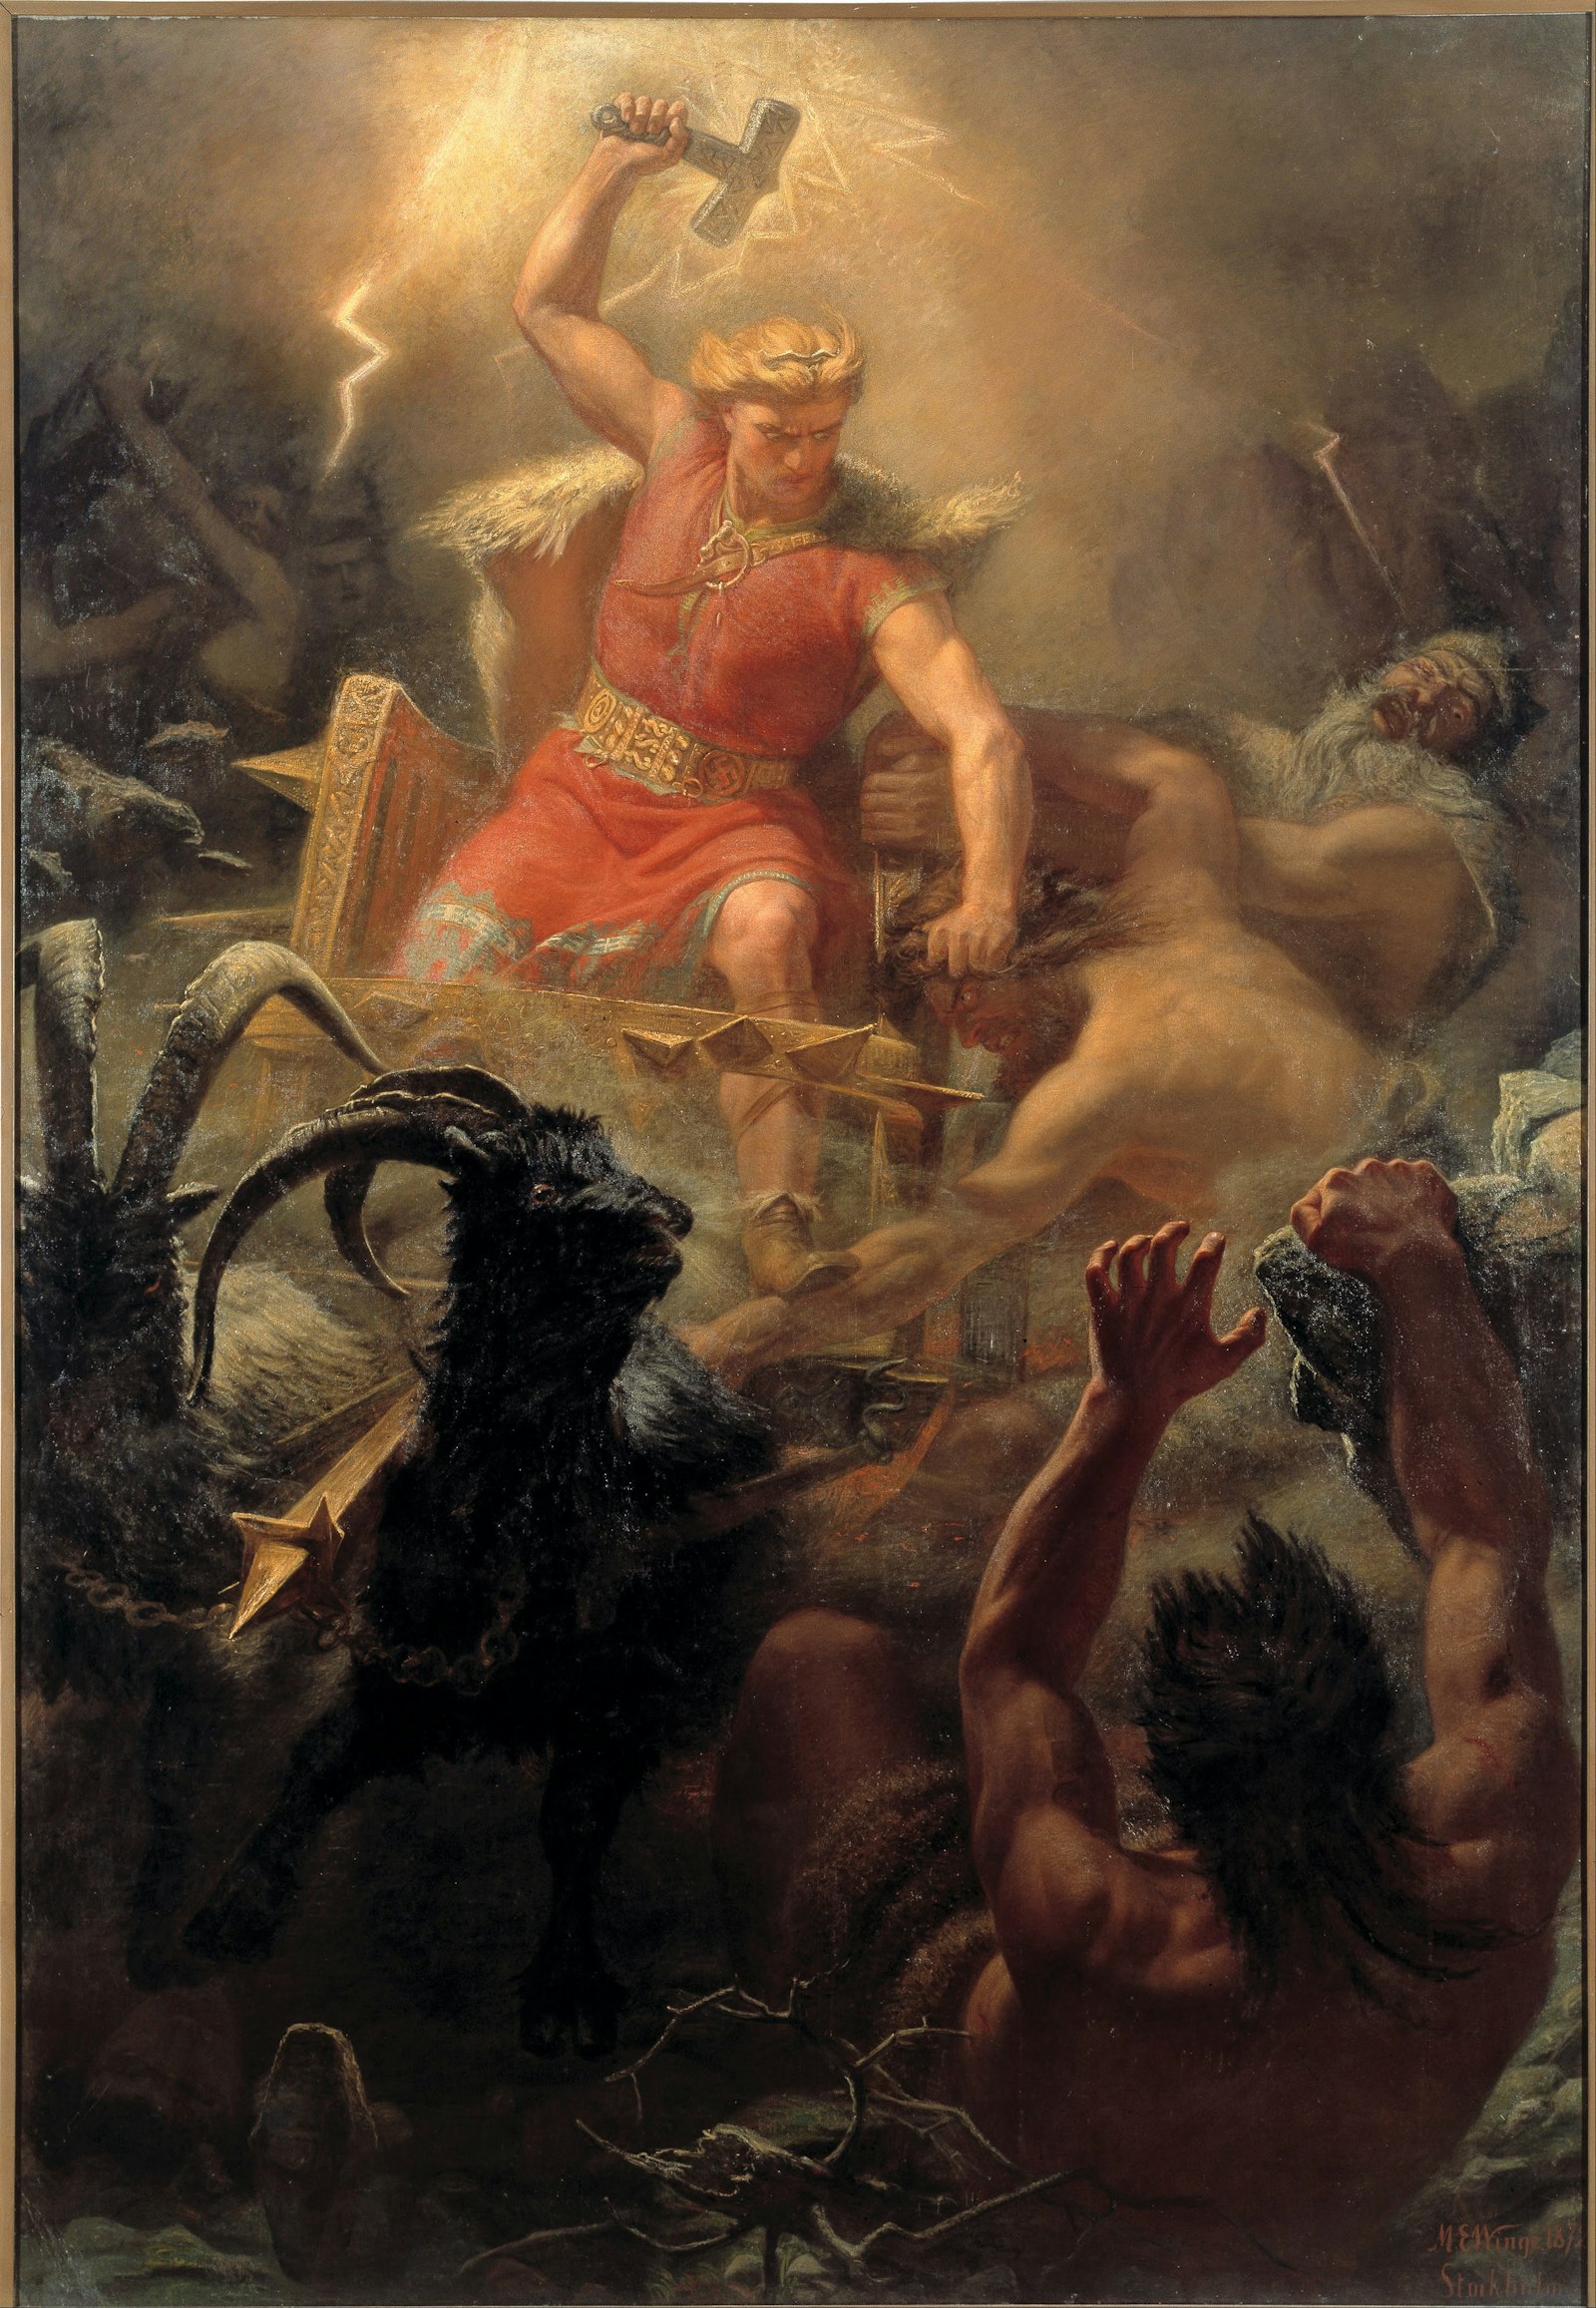 Thor's Fight with the Giants by Mårten Eskil Winge (1872)